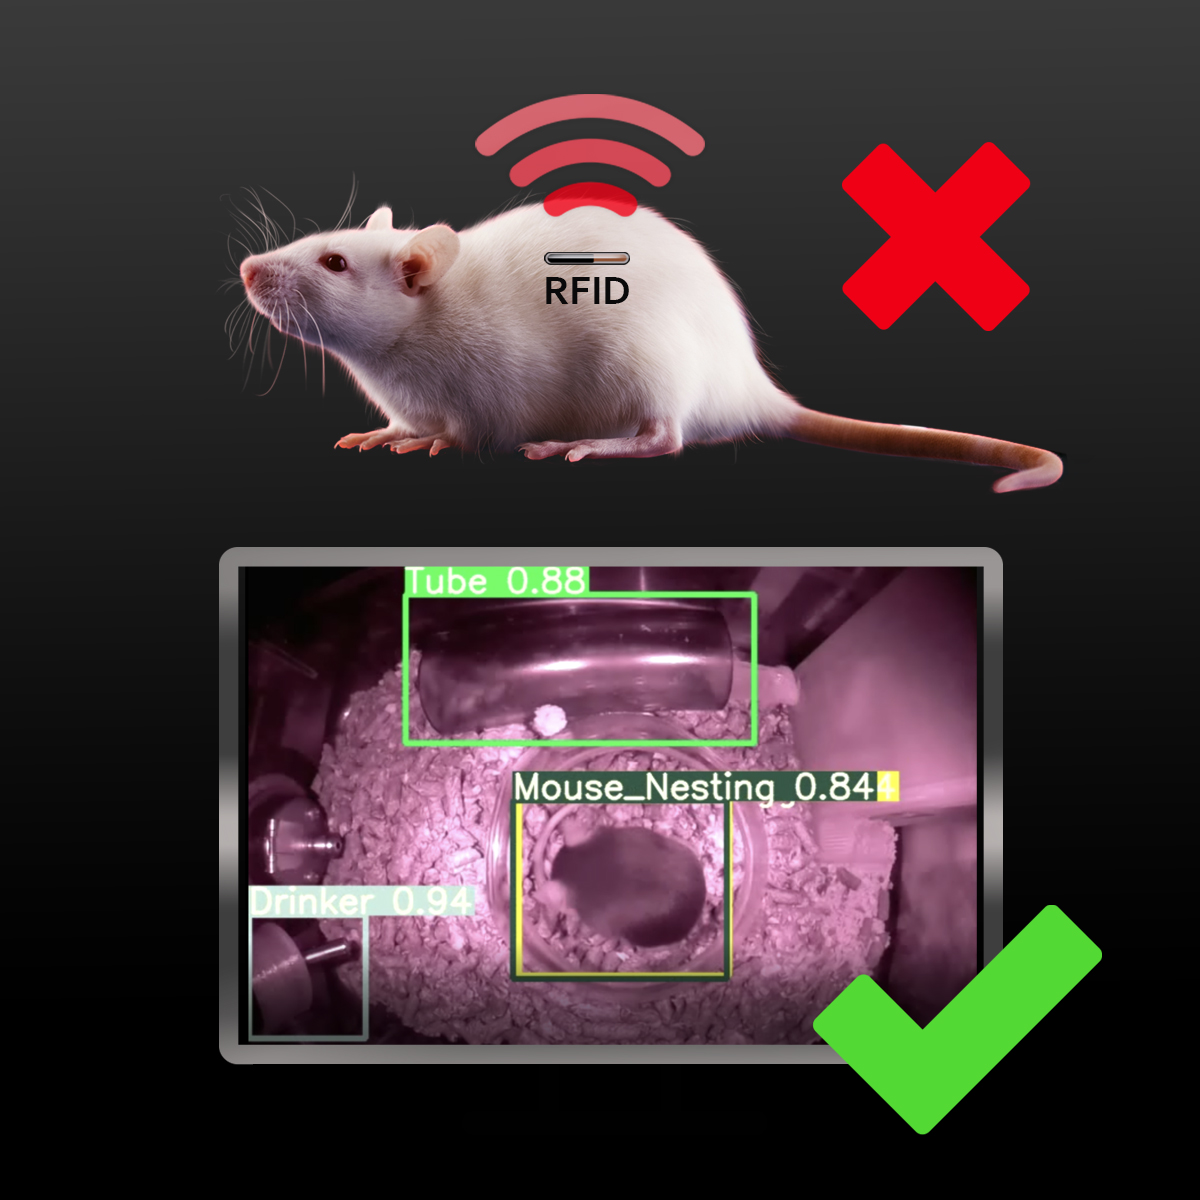 🐭📹 Advancing Animal Research: Video Monitoring vs. RFID Chips 📹🐭

Video monitoring is humane, holistic, and economical. The future of mouse tracking is clear. 

🌟 Prioritize innovation and animal welfare in research.

#preclinicalstudies #mousemodel #mousebehavior